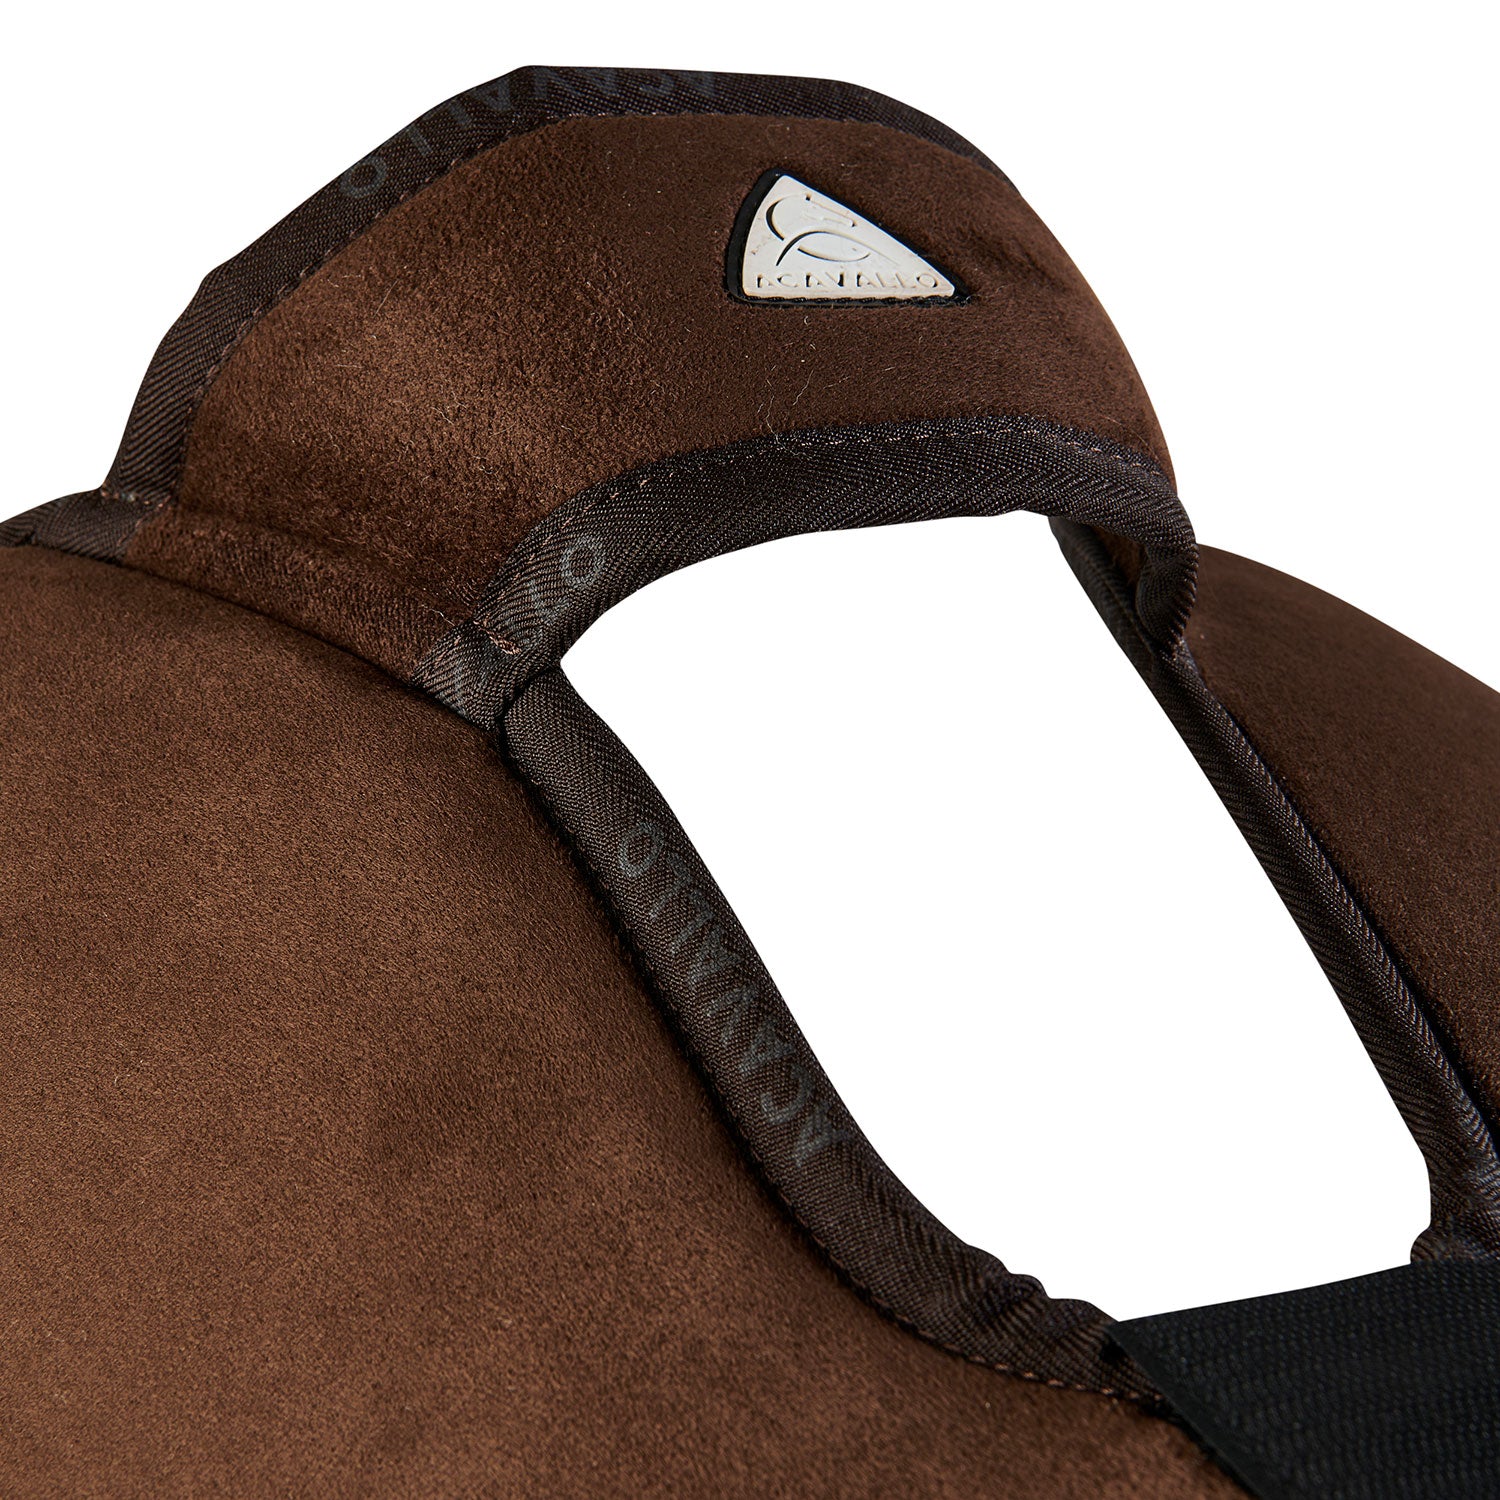 Withers free saddle pad with adjustment inserts